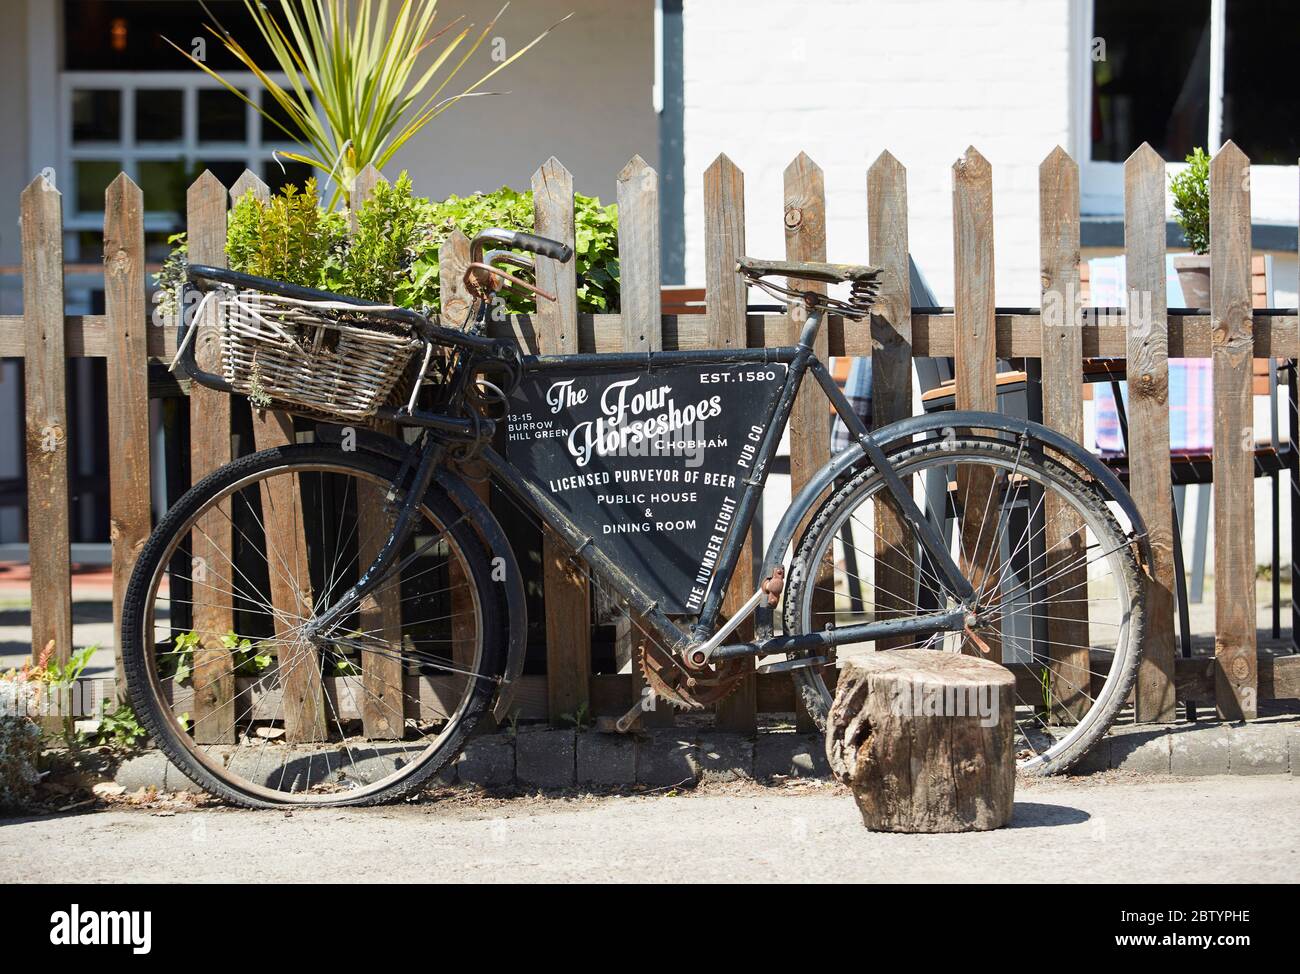 Traditional delivery bicycle outside the Four Horseshoes pub and restaurant, Chobham, Surrey, England, UK Stock Photo